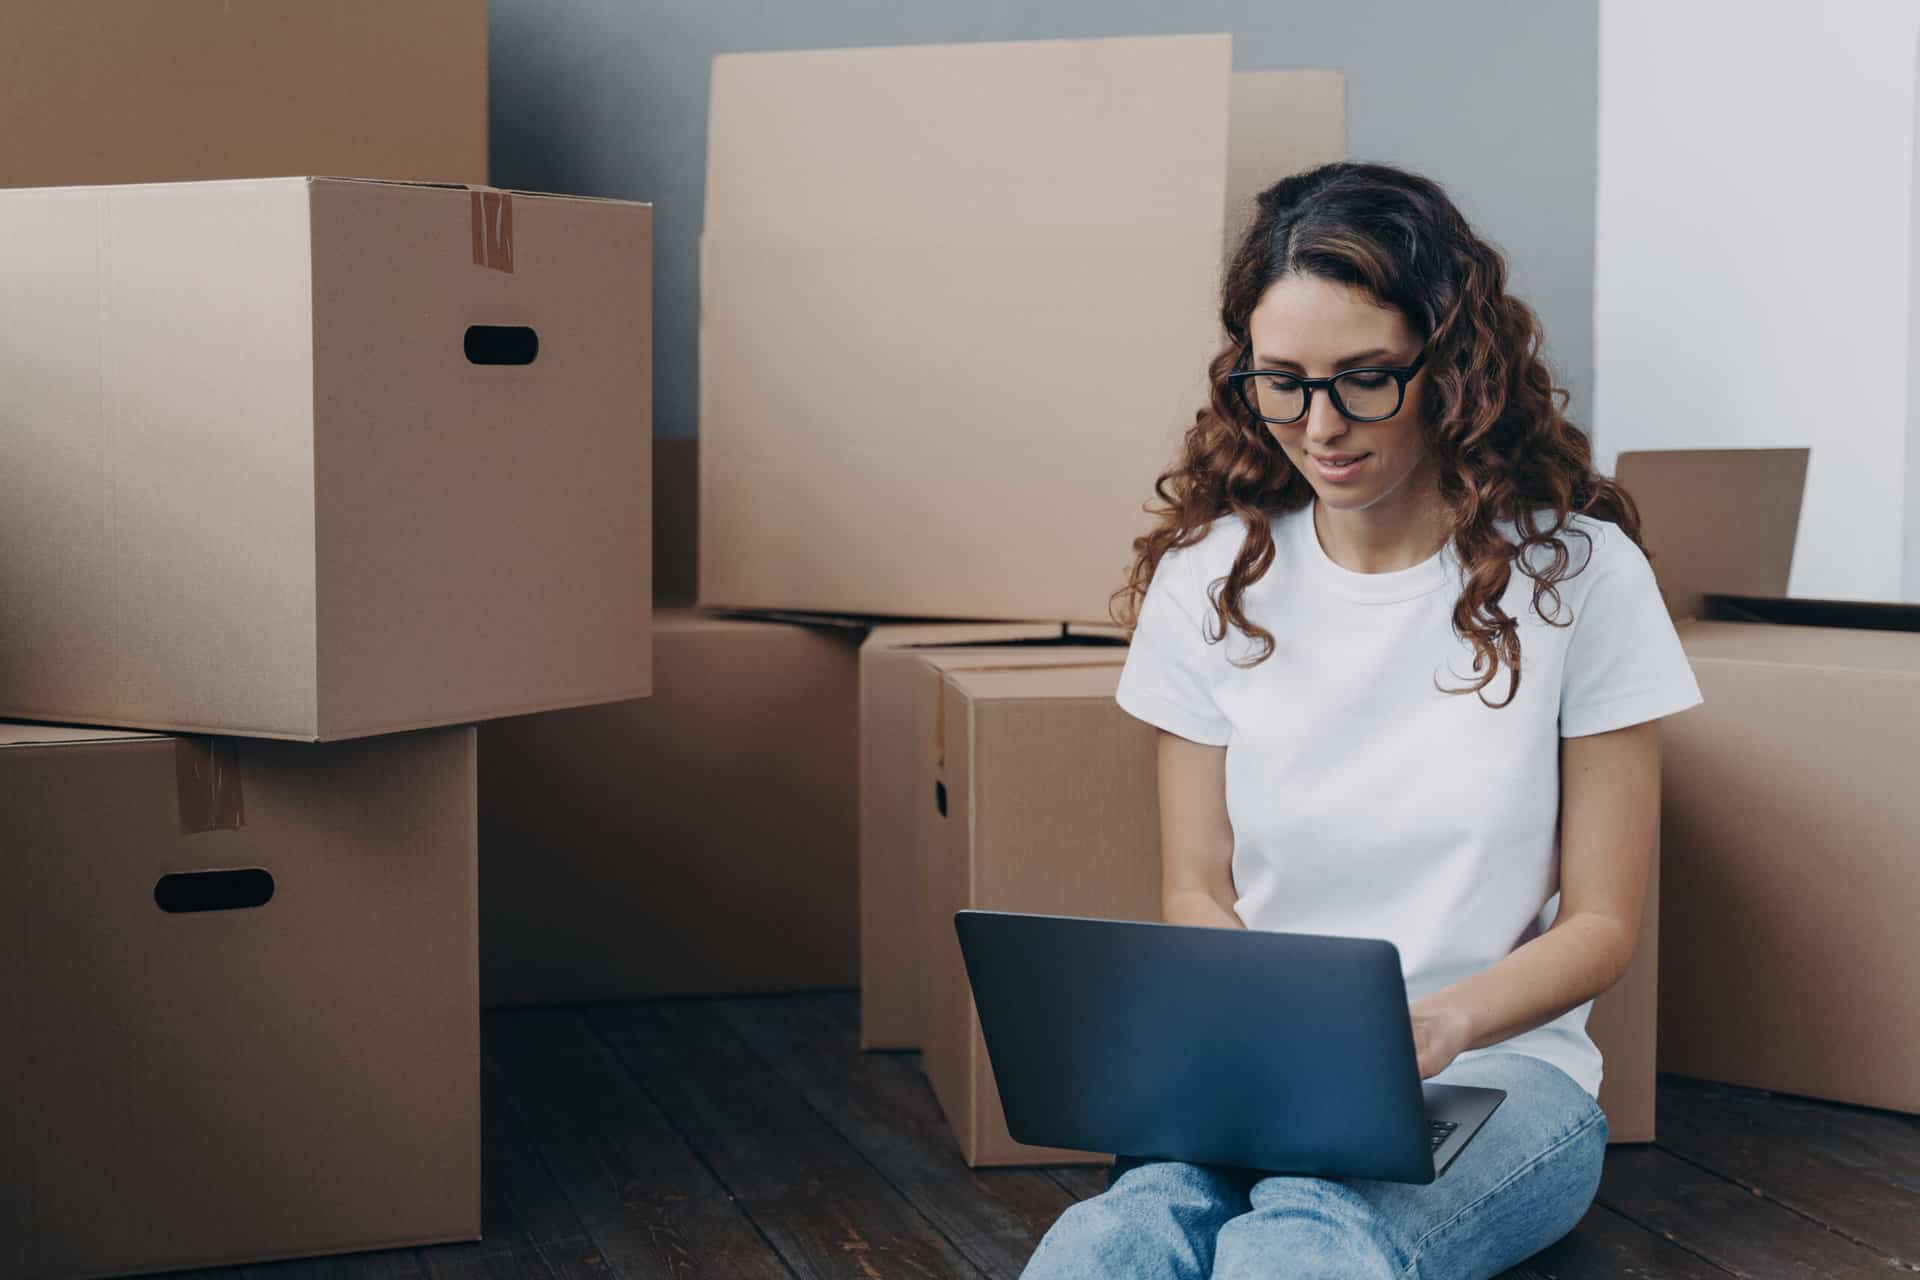 SEO for moving companies